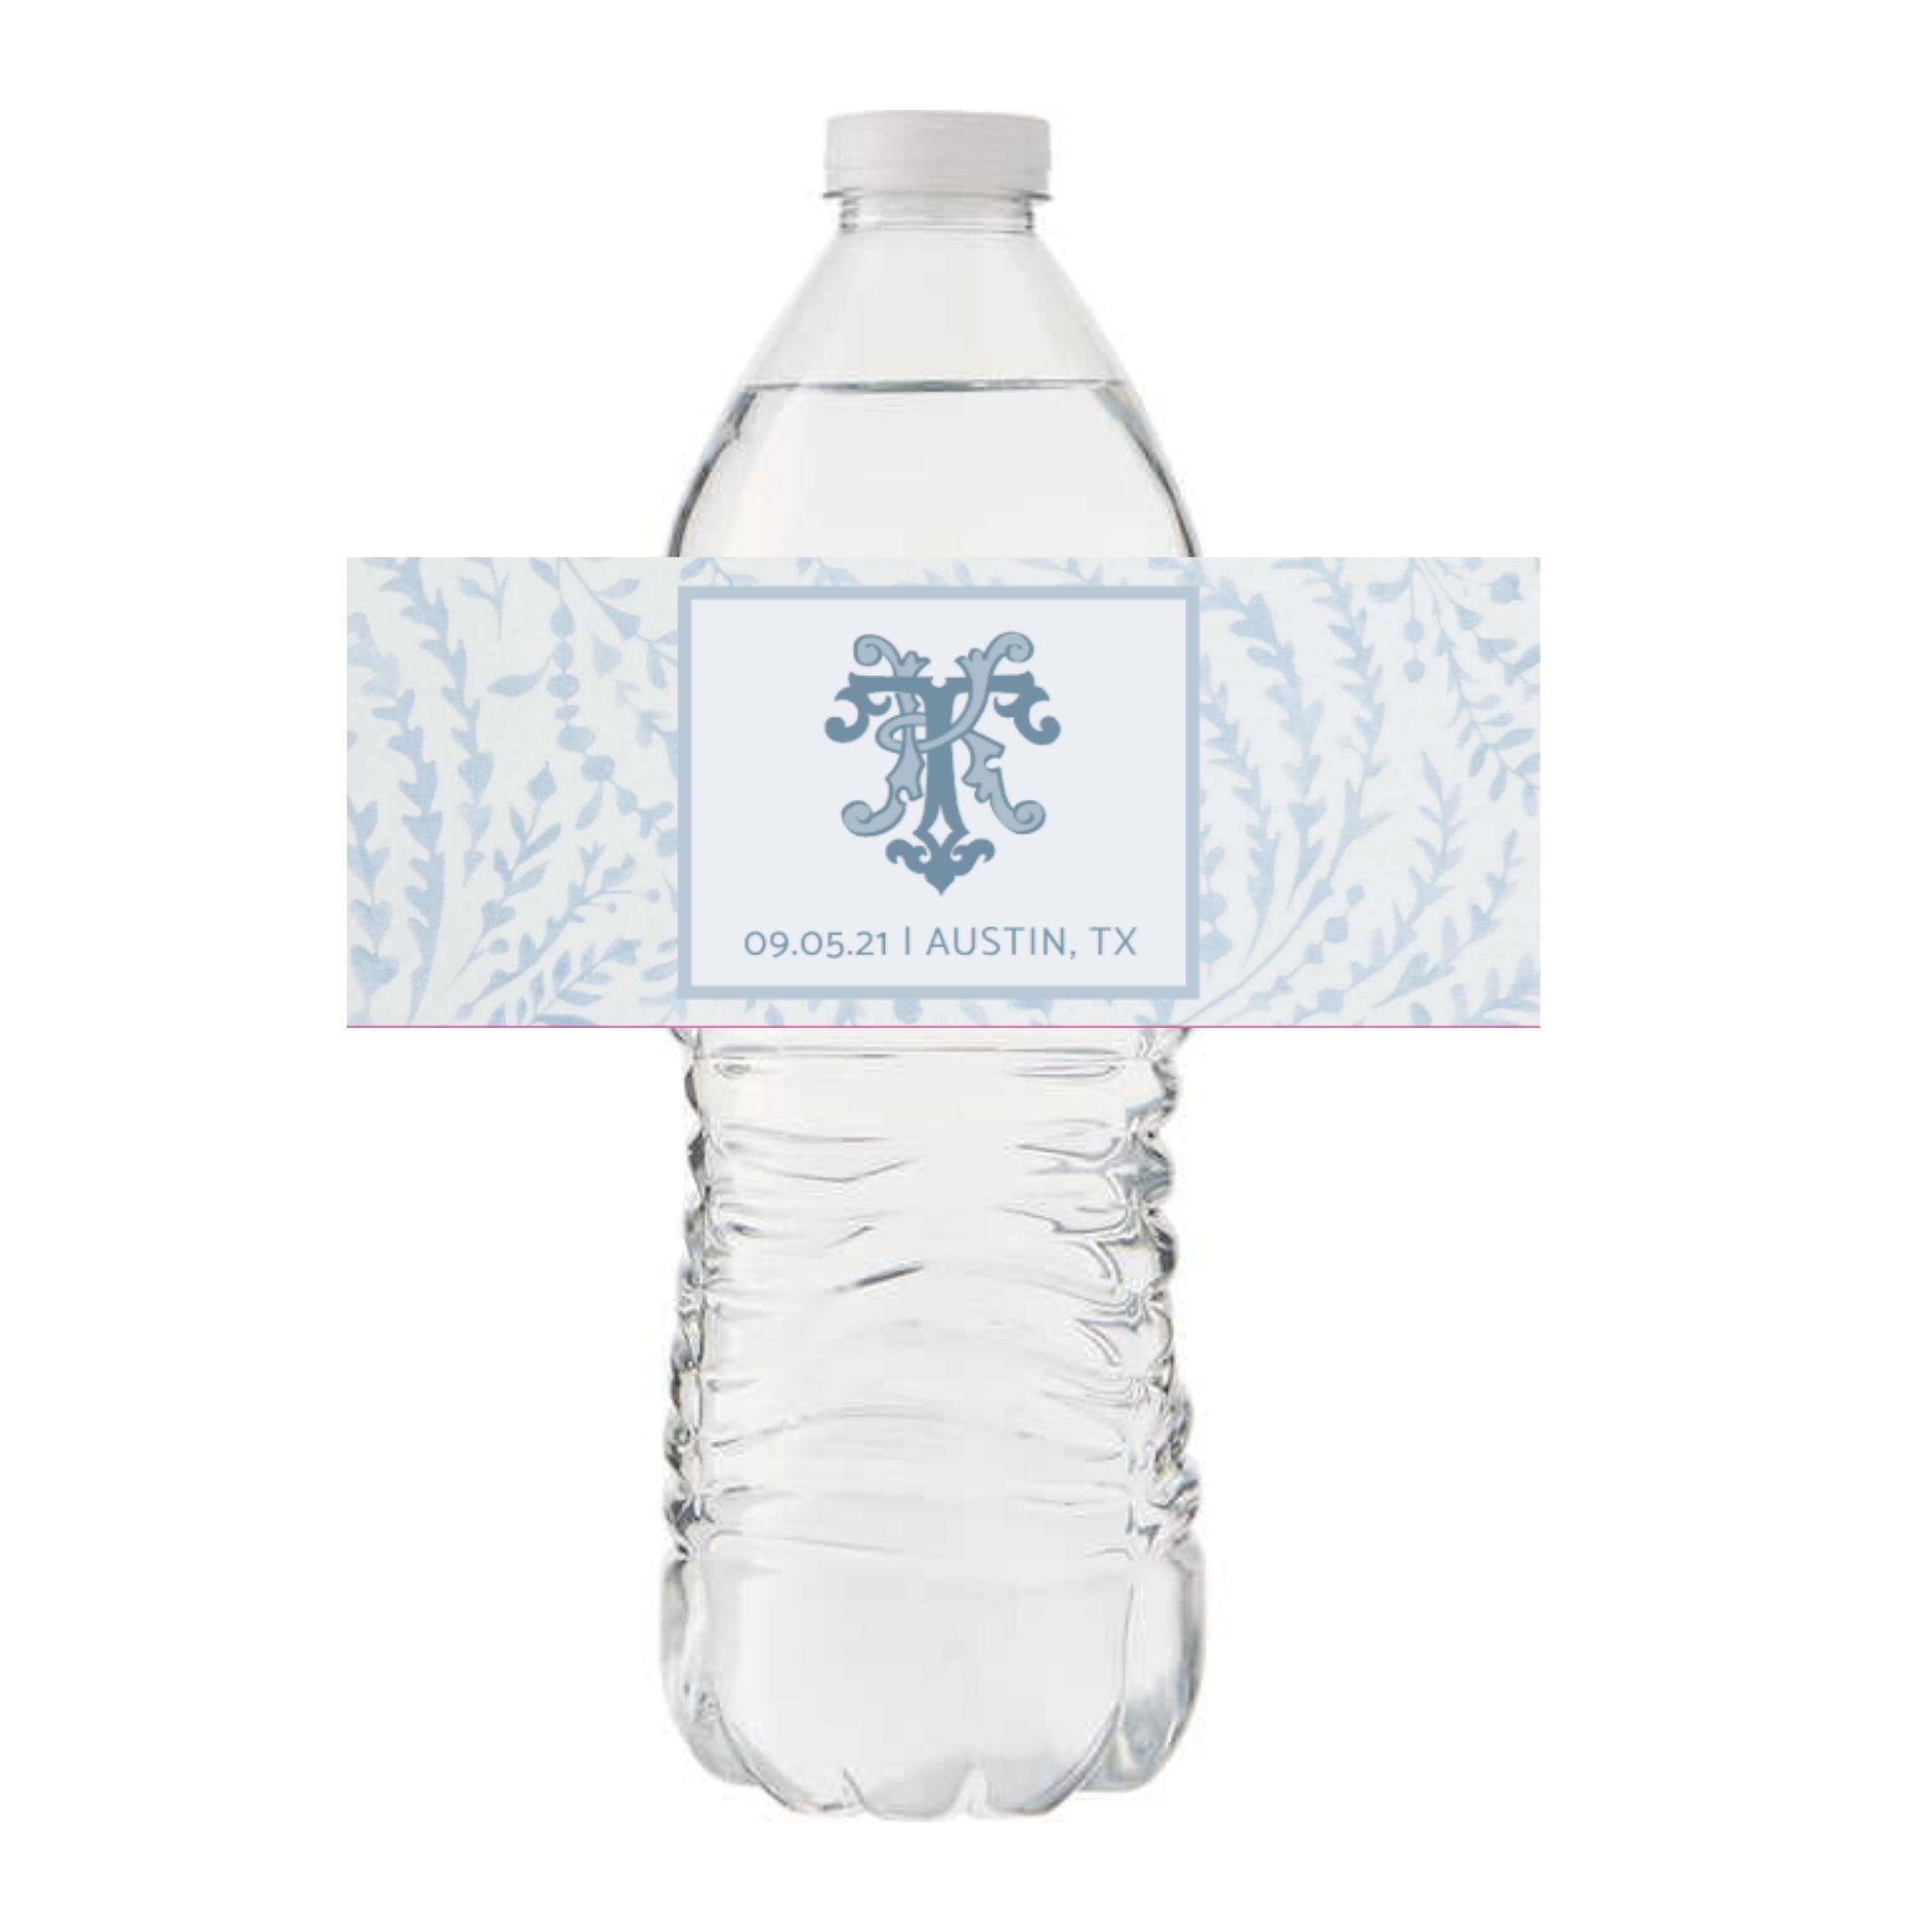 A water bottle is wrapped in a custom label with a monogram and a date